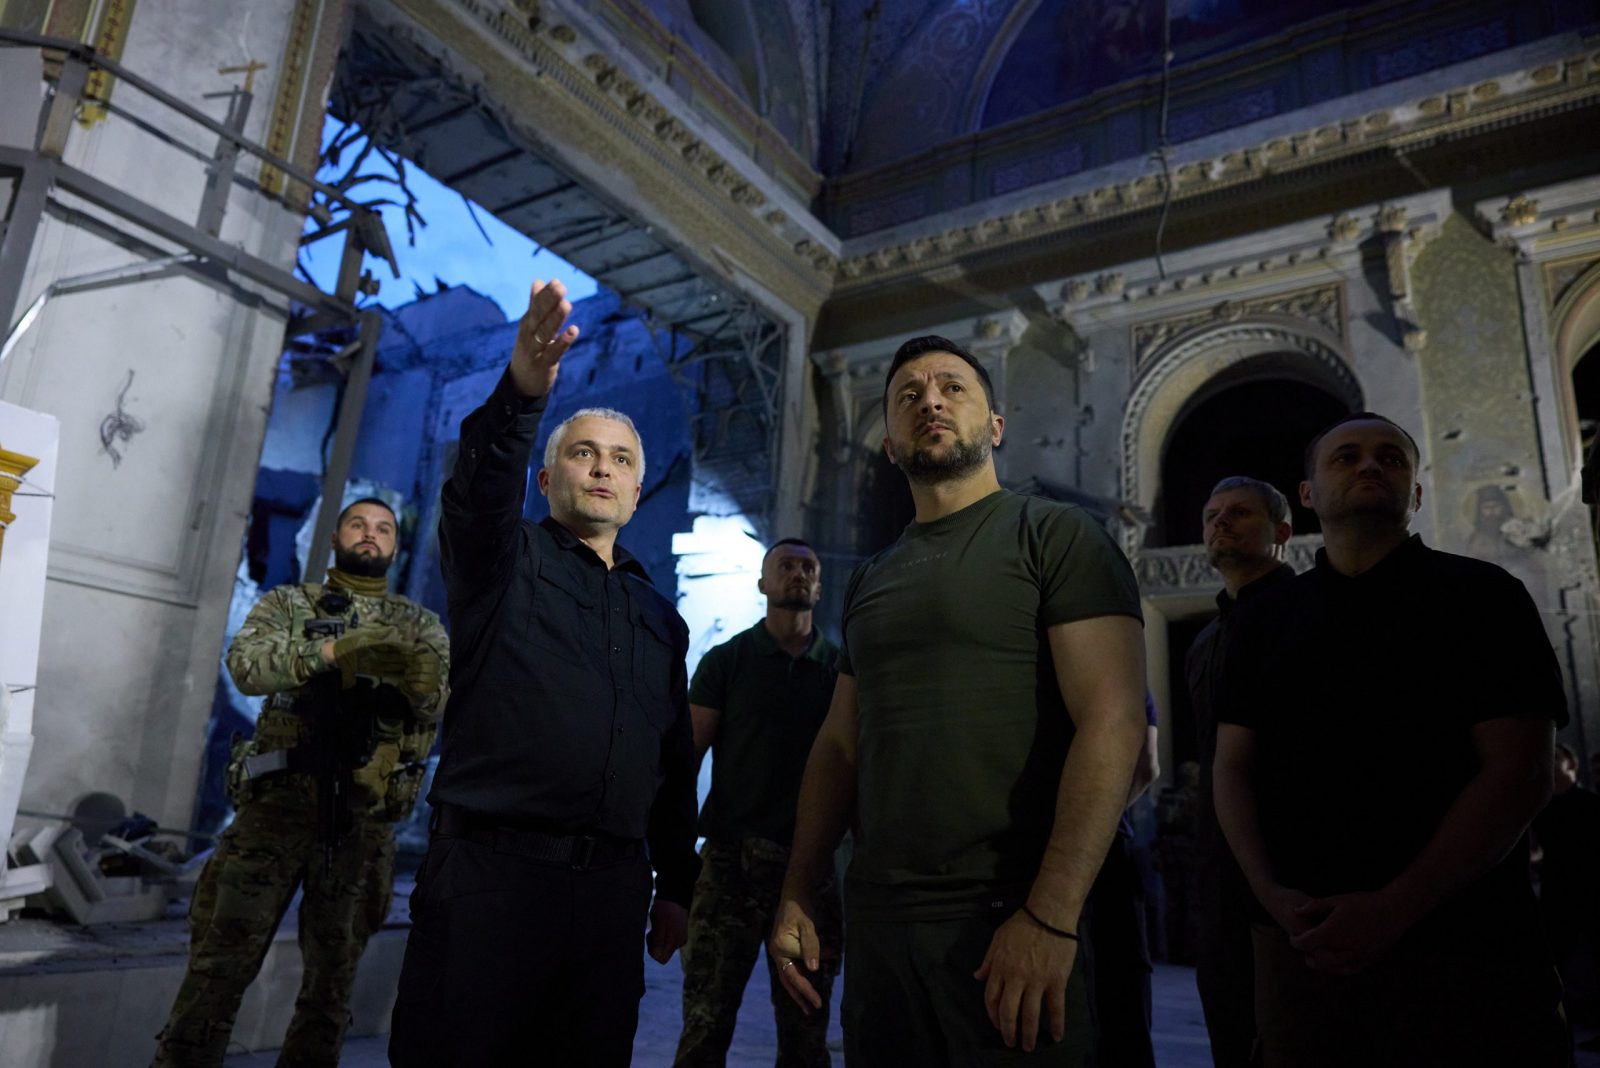 epa10772822 A handout photo made available by the Ukrainian Presidential Press Service shows Ukraine's President Volodymyr Zelensky (2-R) inspecting the damage inside the Spaso-Preobrazhensky Cathedral (Transfiguration Cathedral) during a working trip in Odesa, southern Ukraine, 27 July 2023 (issued 28 July 2023). According to the Ukrainian presidential office, Zelensky was briefed about the extent of the damage of the church and its current condition. On 23 July 2023, the Orthodox cathedral was severely damaged by a Russian missile attack. The UNESCO has condemned Russian attacks on World Heritage sites in Ukraine, including the Spaso-Preobrazhensky Cathedral. Russia, which began its full-scale invasion of Ukraine in February 2022, has recently pulled out of a UN-Turkey brokered agreement guaranteeing safe passage to Ukrainian grain exports through the Black Sea and started the mass shelling of Odesa city, granaries, agricultural enterprises, and sea ports.  EPA/UKRAINIAN PRESIDENTIAL PRESS SERVICE HANDOUT -- MANDATORY CREDIT: UKRAINIAN PRESIDENTIAL PRESS SERVICE -- HANDOUT EDITORIAL USE ONLY/NO SALES